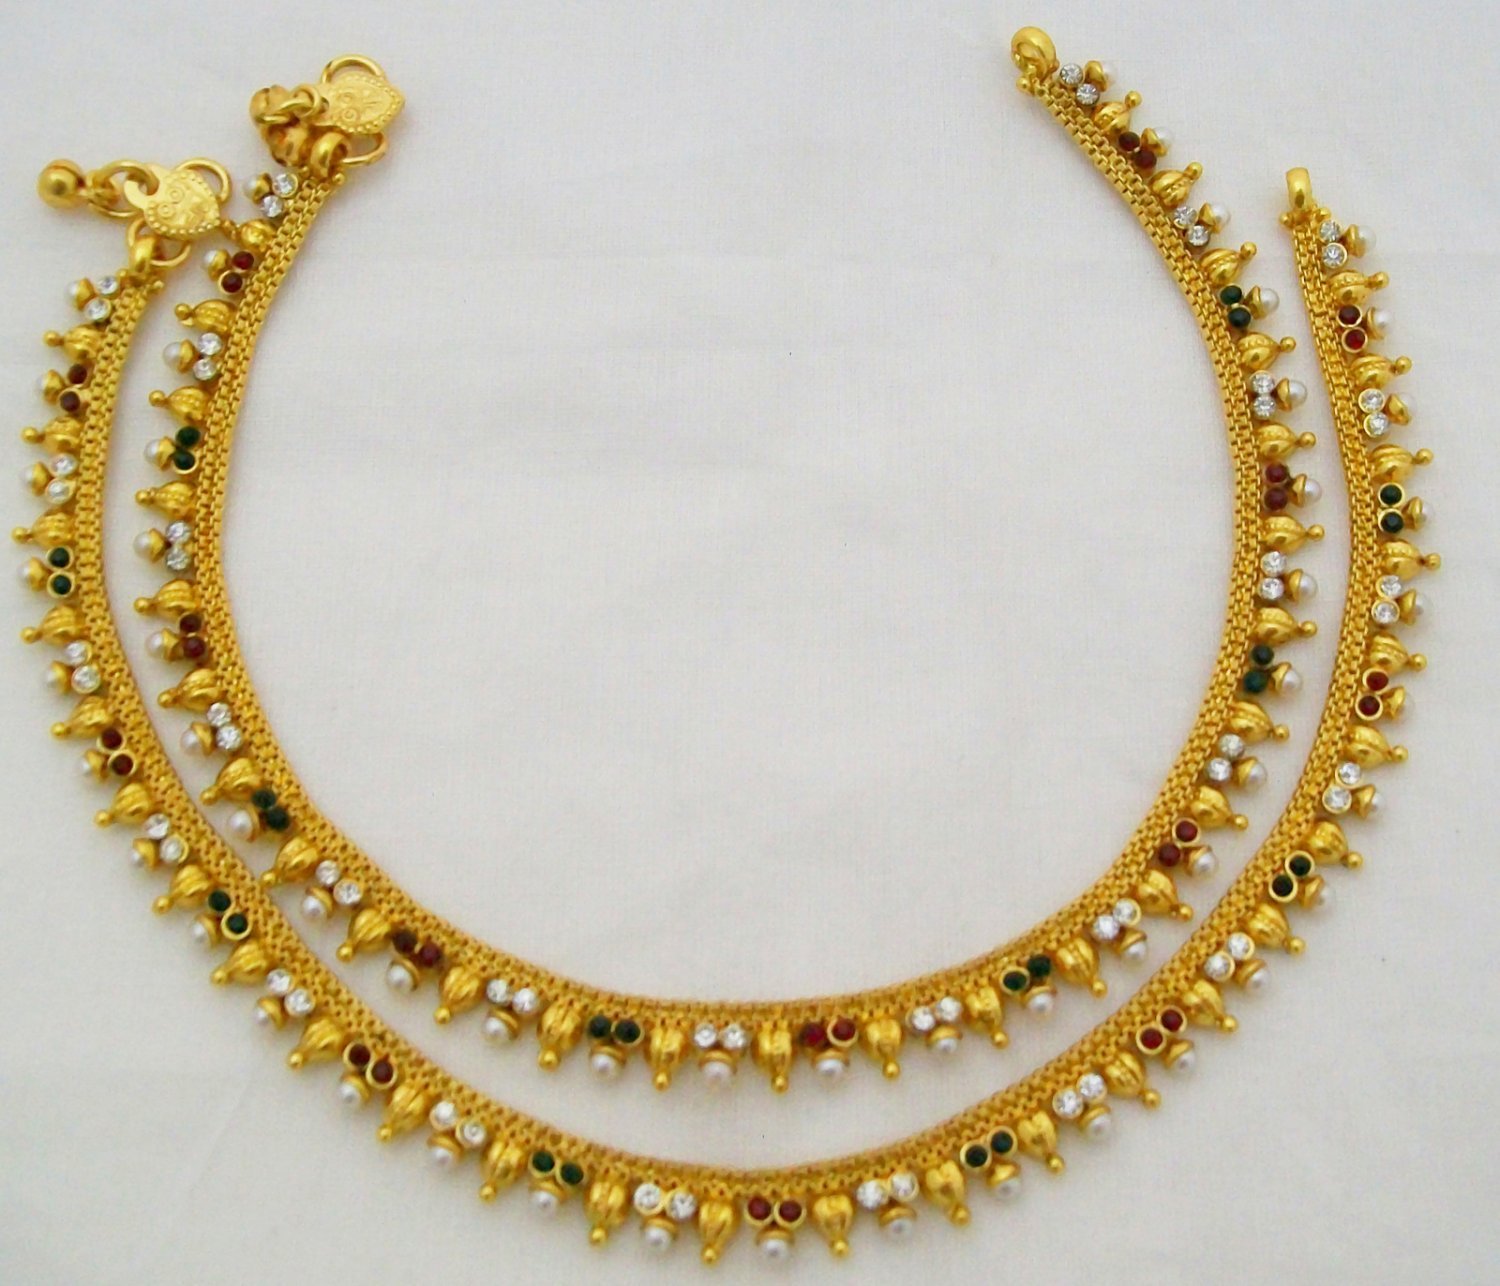 Details about   ANKLET BRACELET 22k GOLD PLATED PAYAL SET BOLLYWOOD Fashion INDIAN JEWELRY sp1 